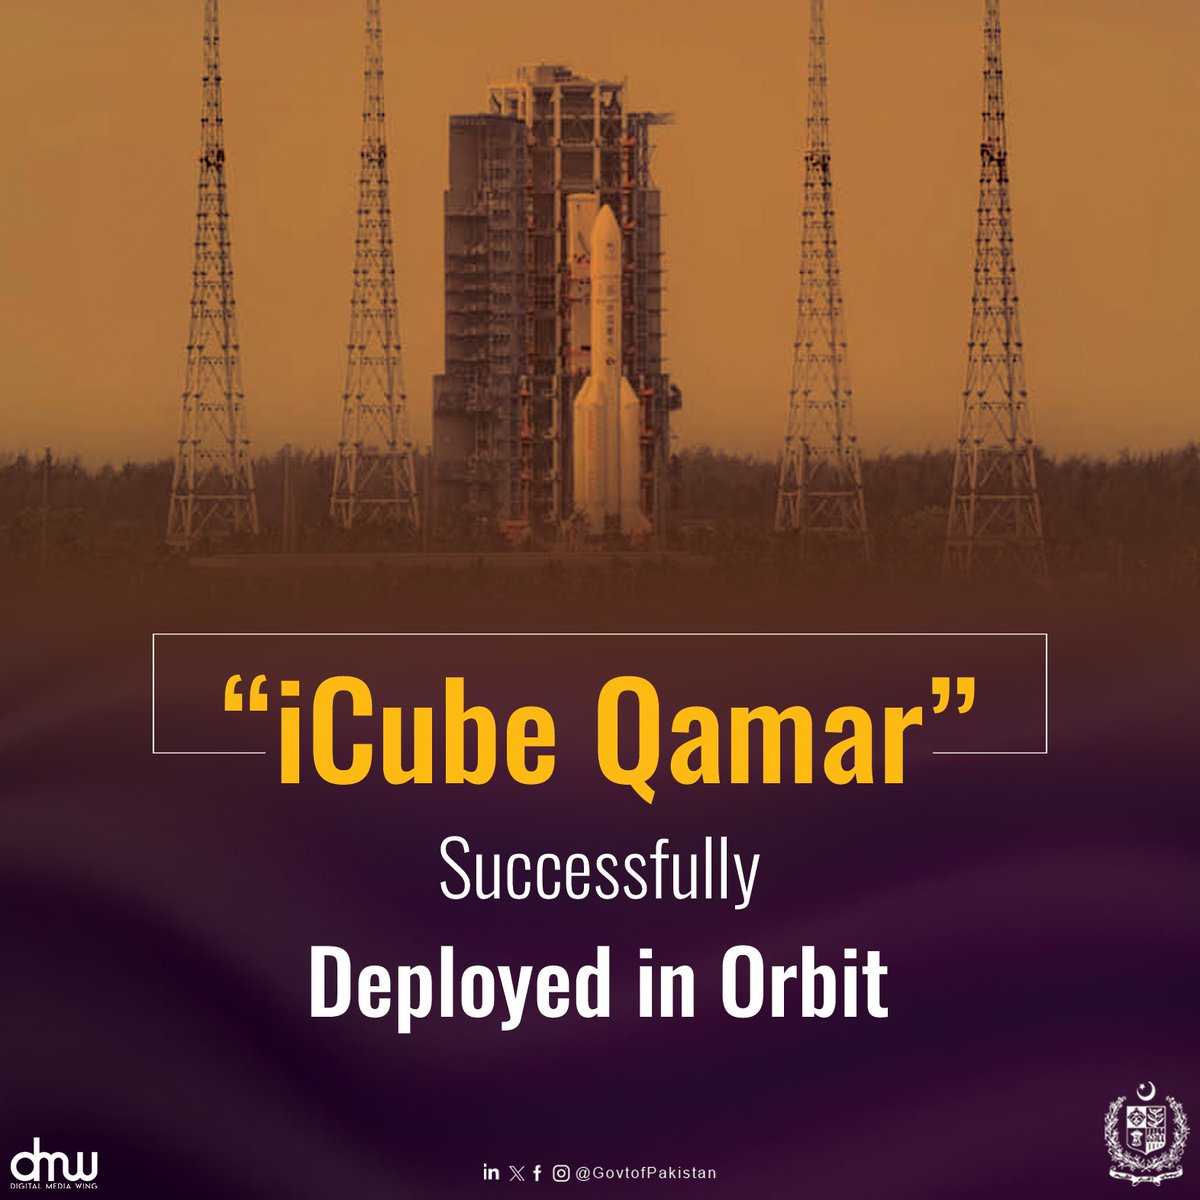 Pakistan’s first lunar mission, iCube Qamar, has been successfully deployed in orbit.